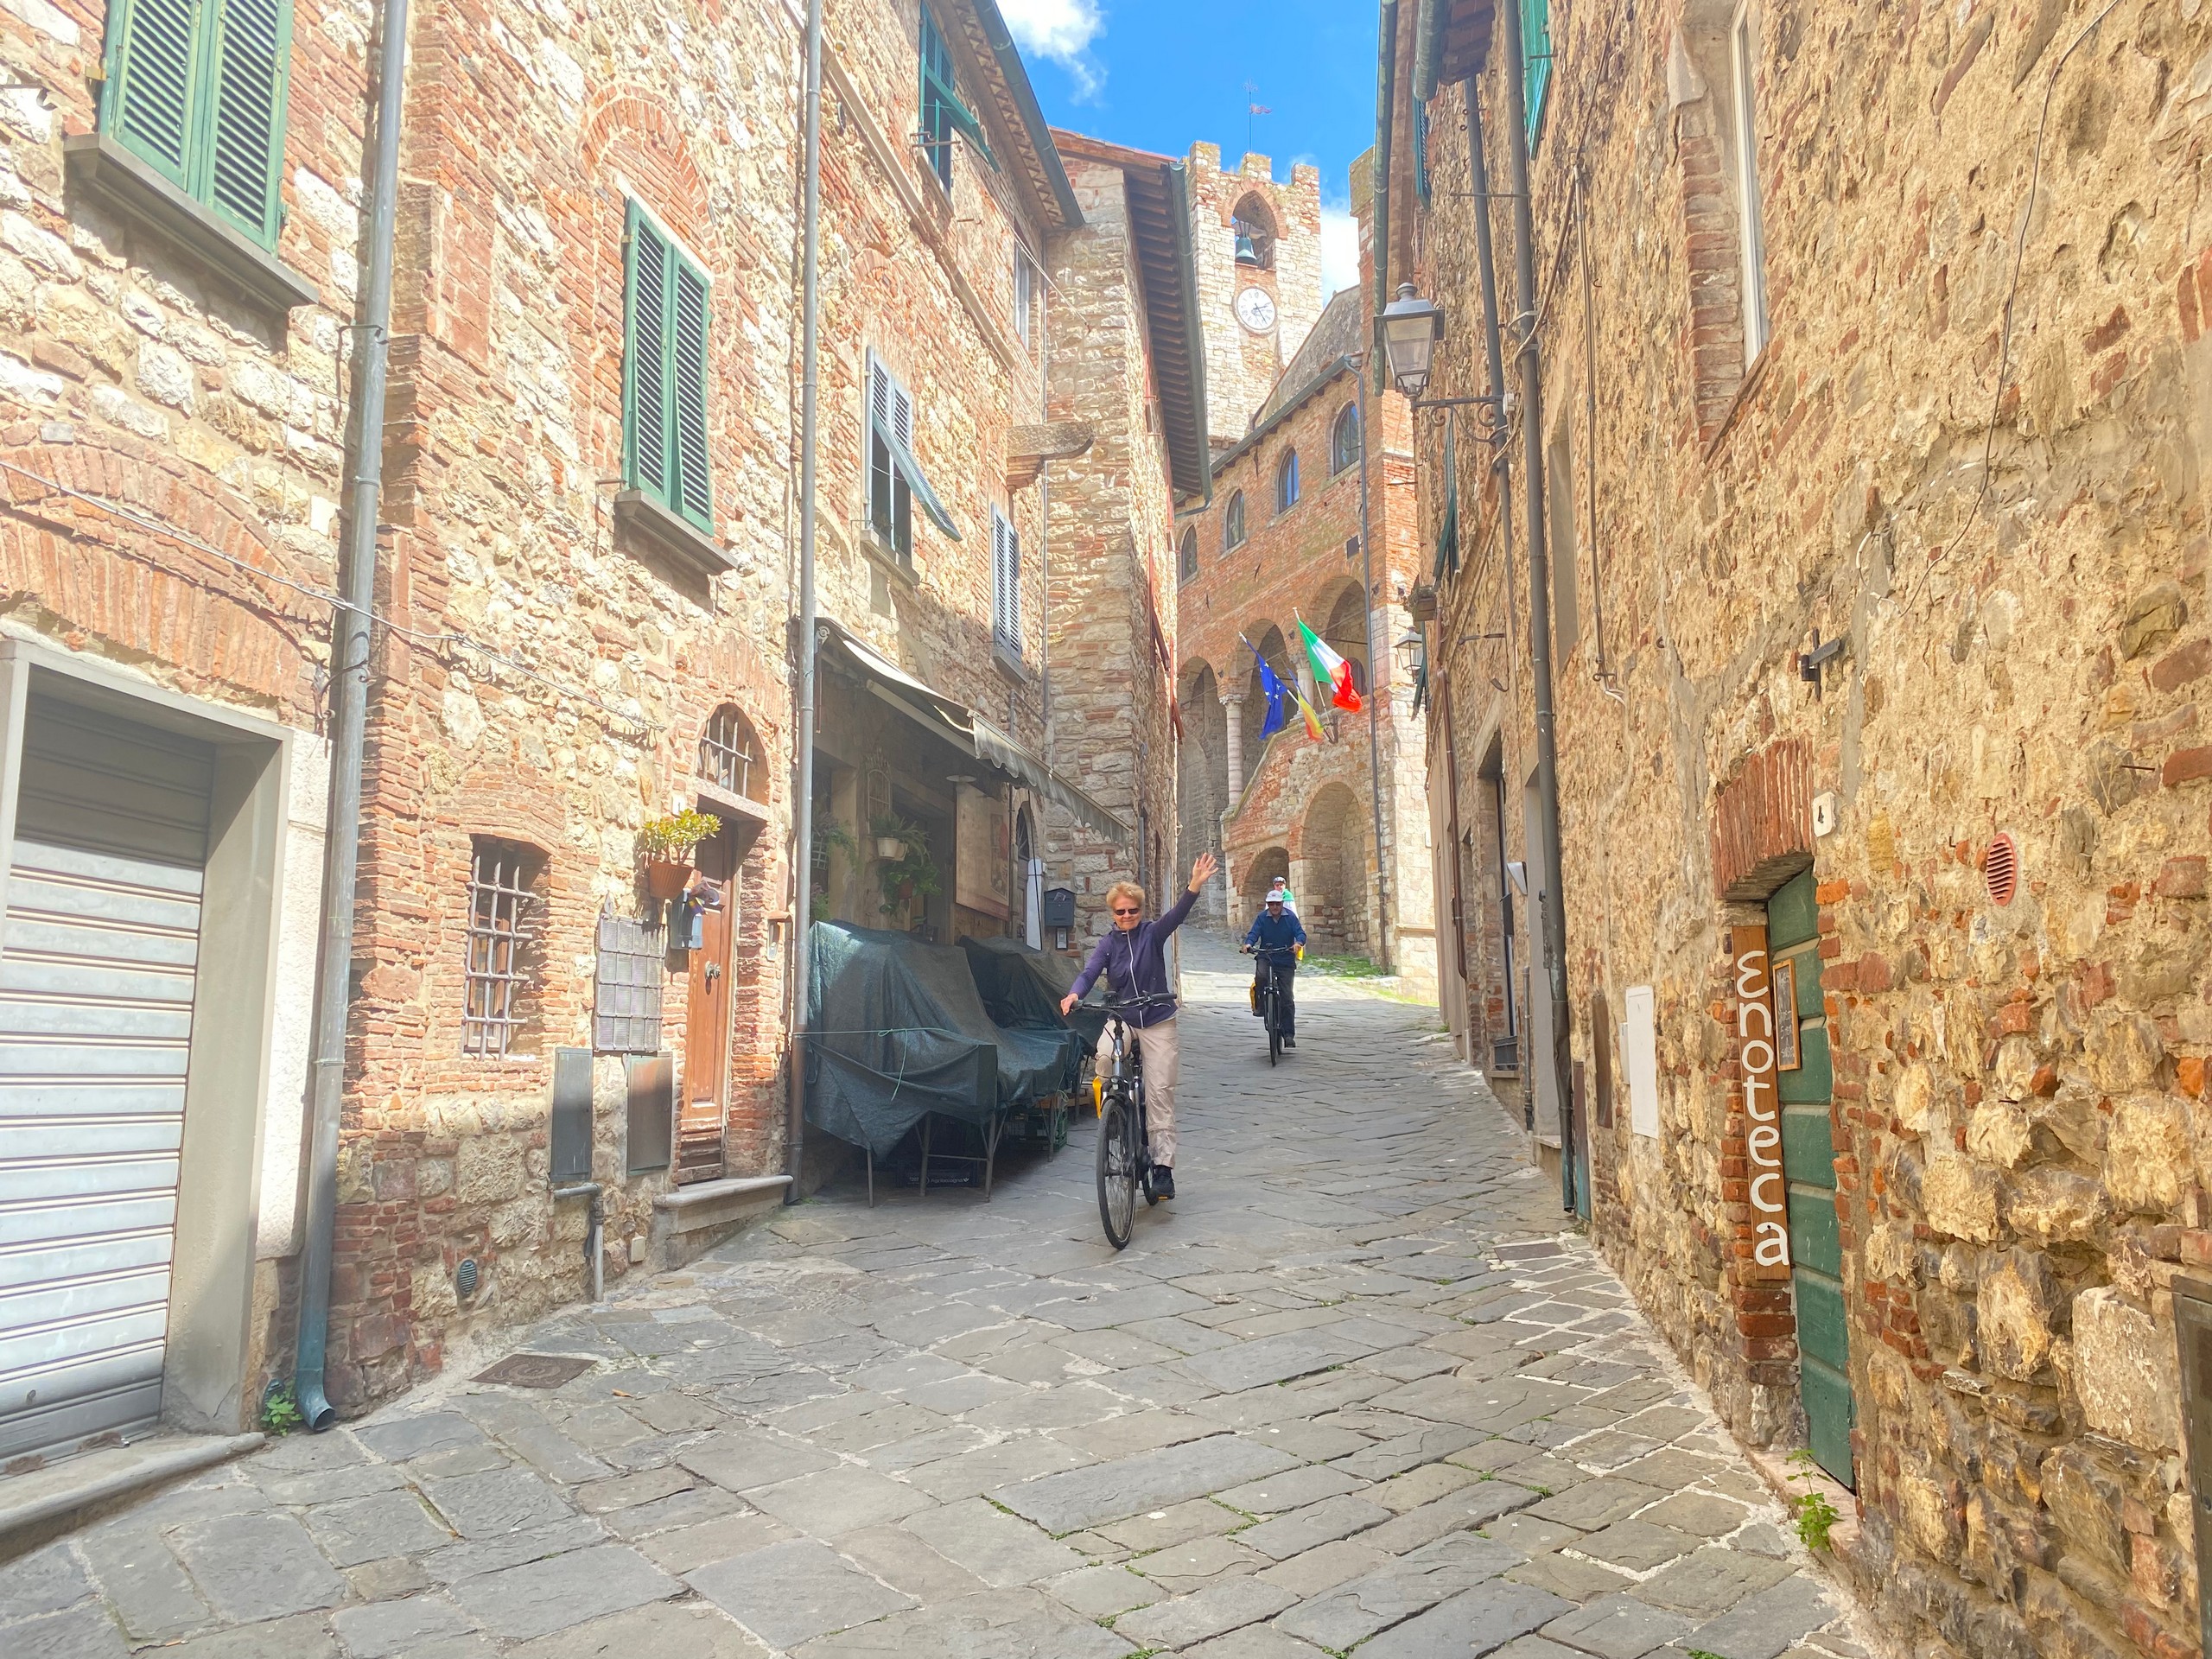 Small oldtown in Tuscany